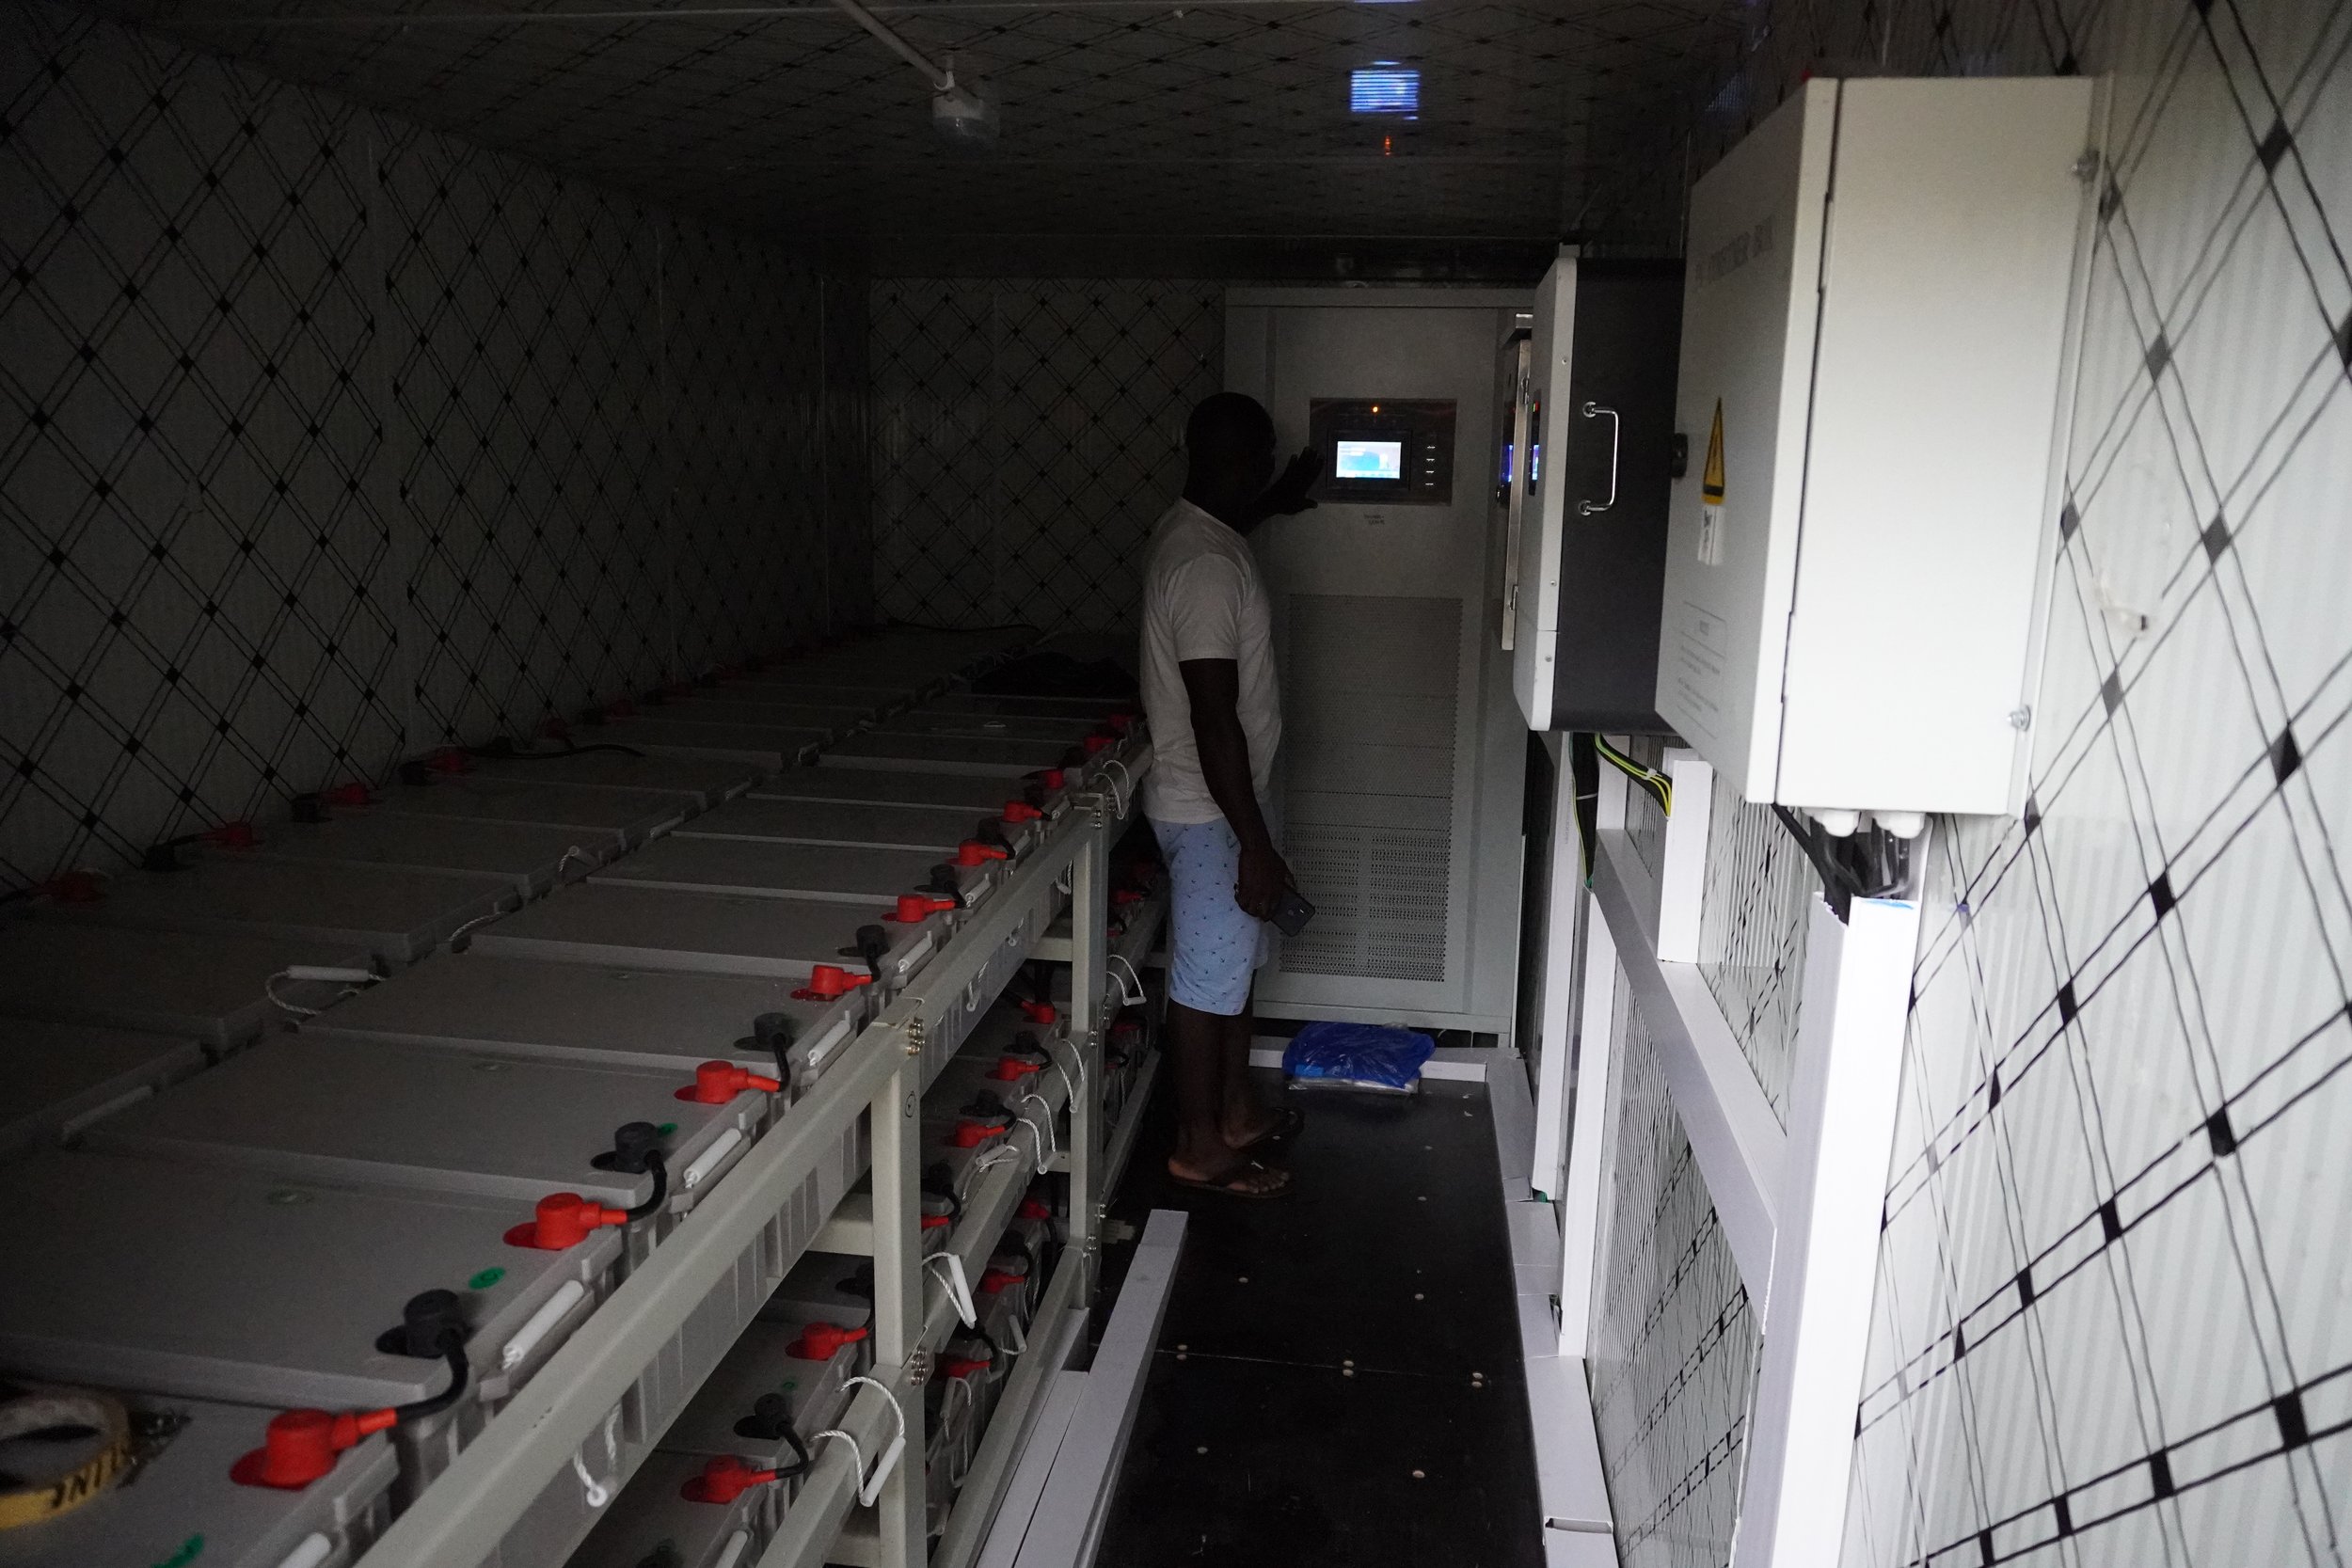  Abel Youkou has been trained to look after the machines in the solar complex. Inside the machine room there are about 100 batteries. The complex is secured by a fence and a guard keeps records of the use of the facilities. 